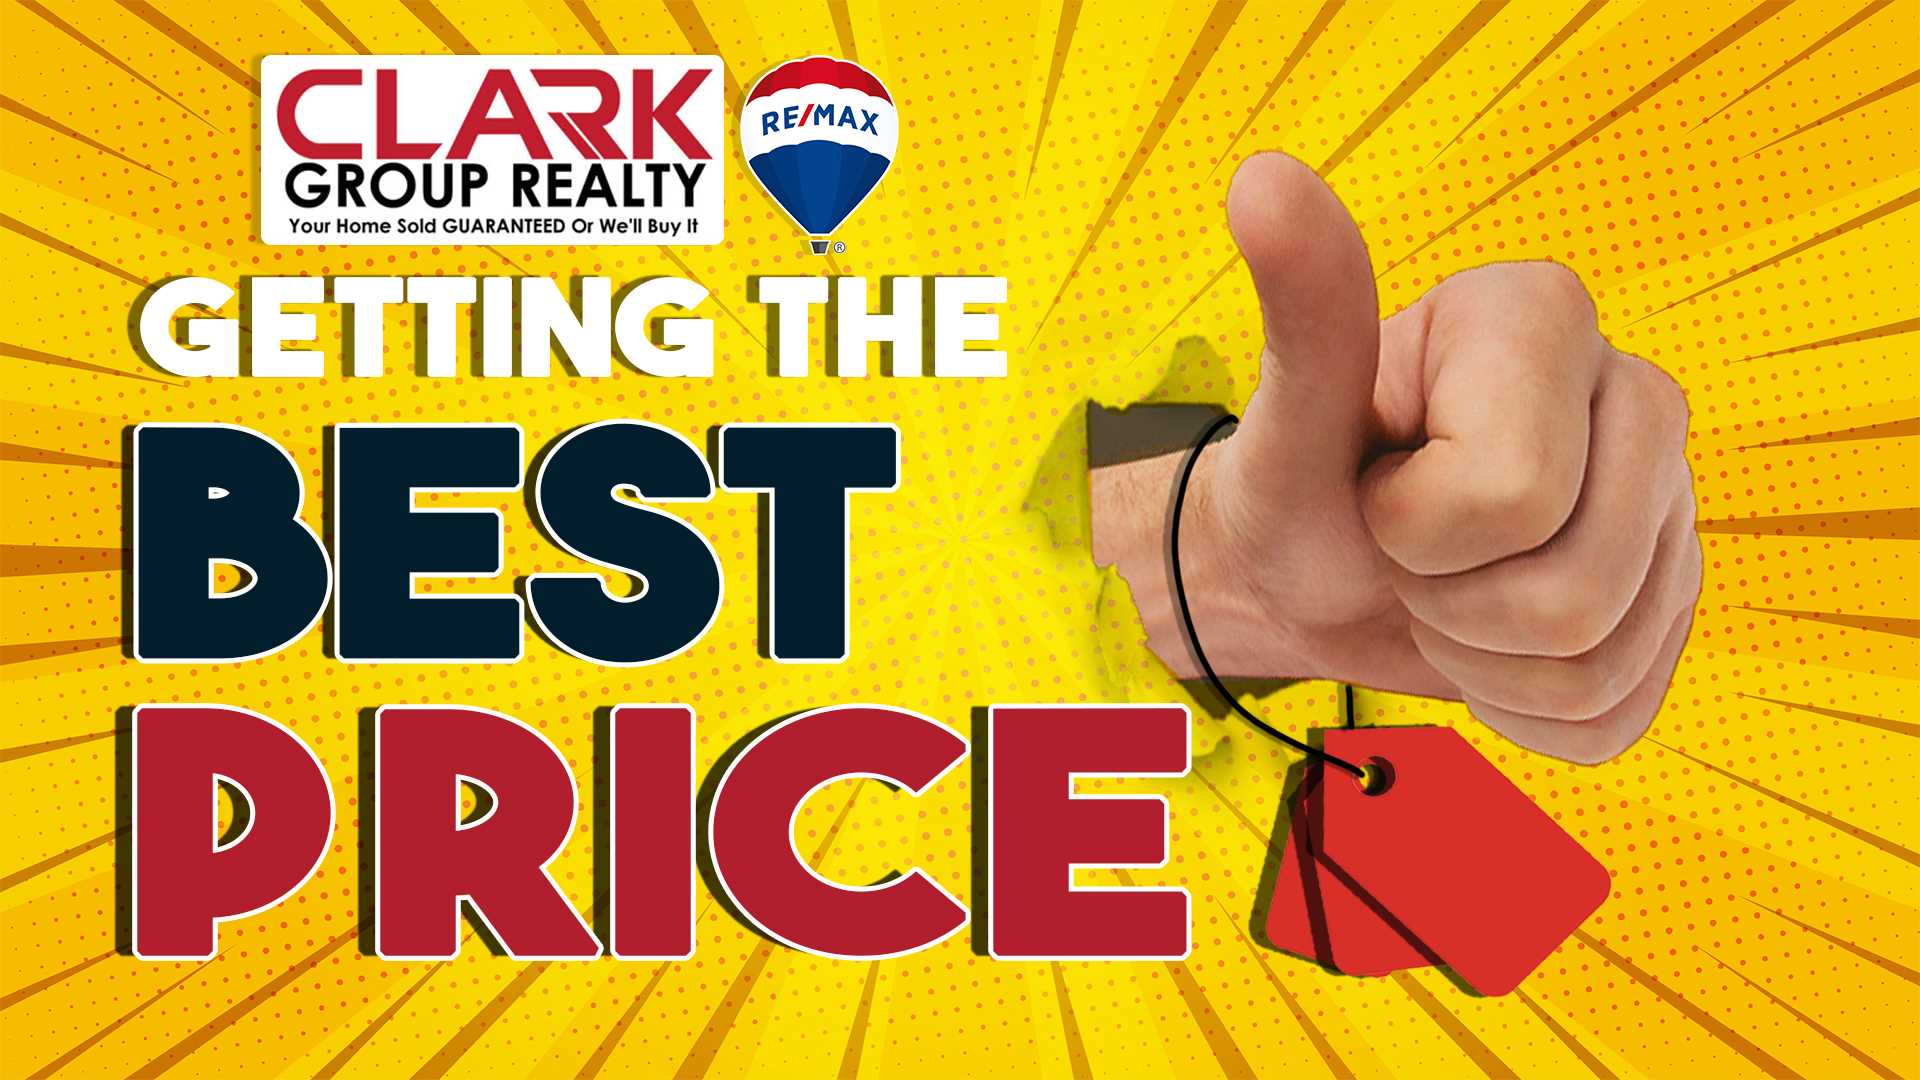 Get the Highest Price You can When You Sell Your Home